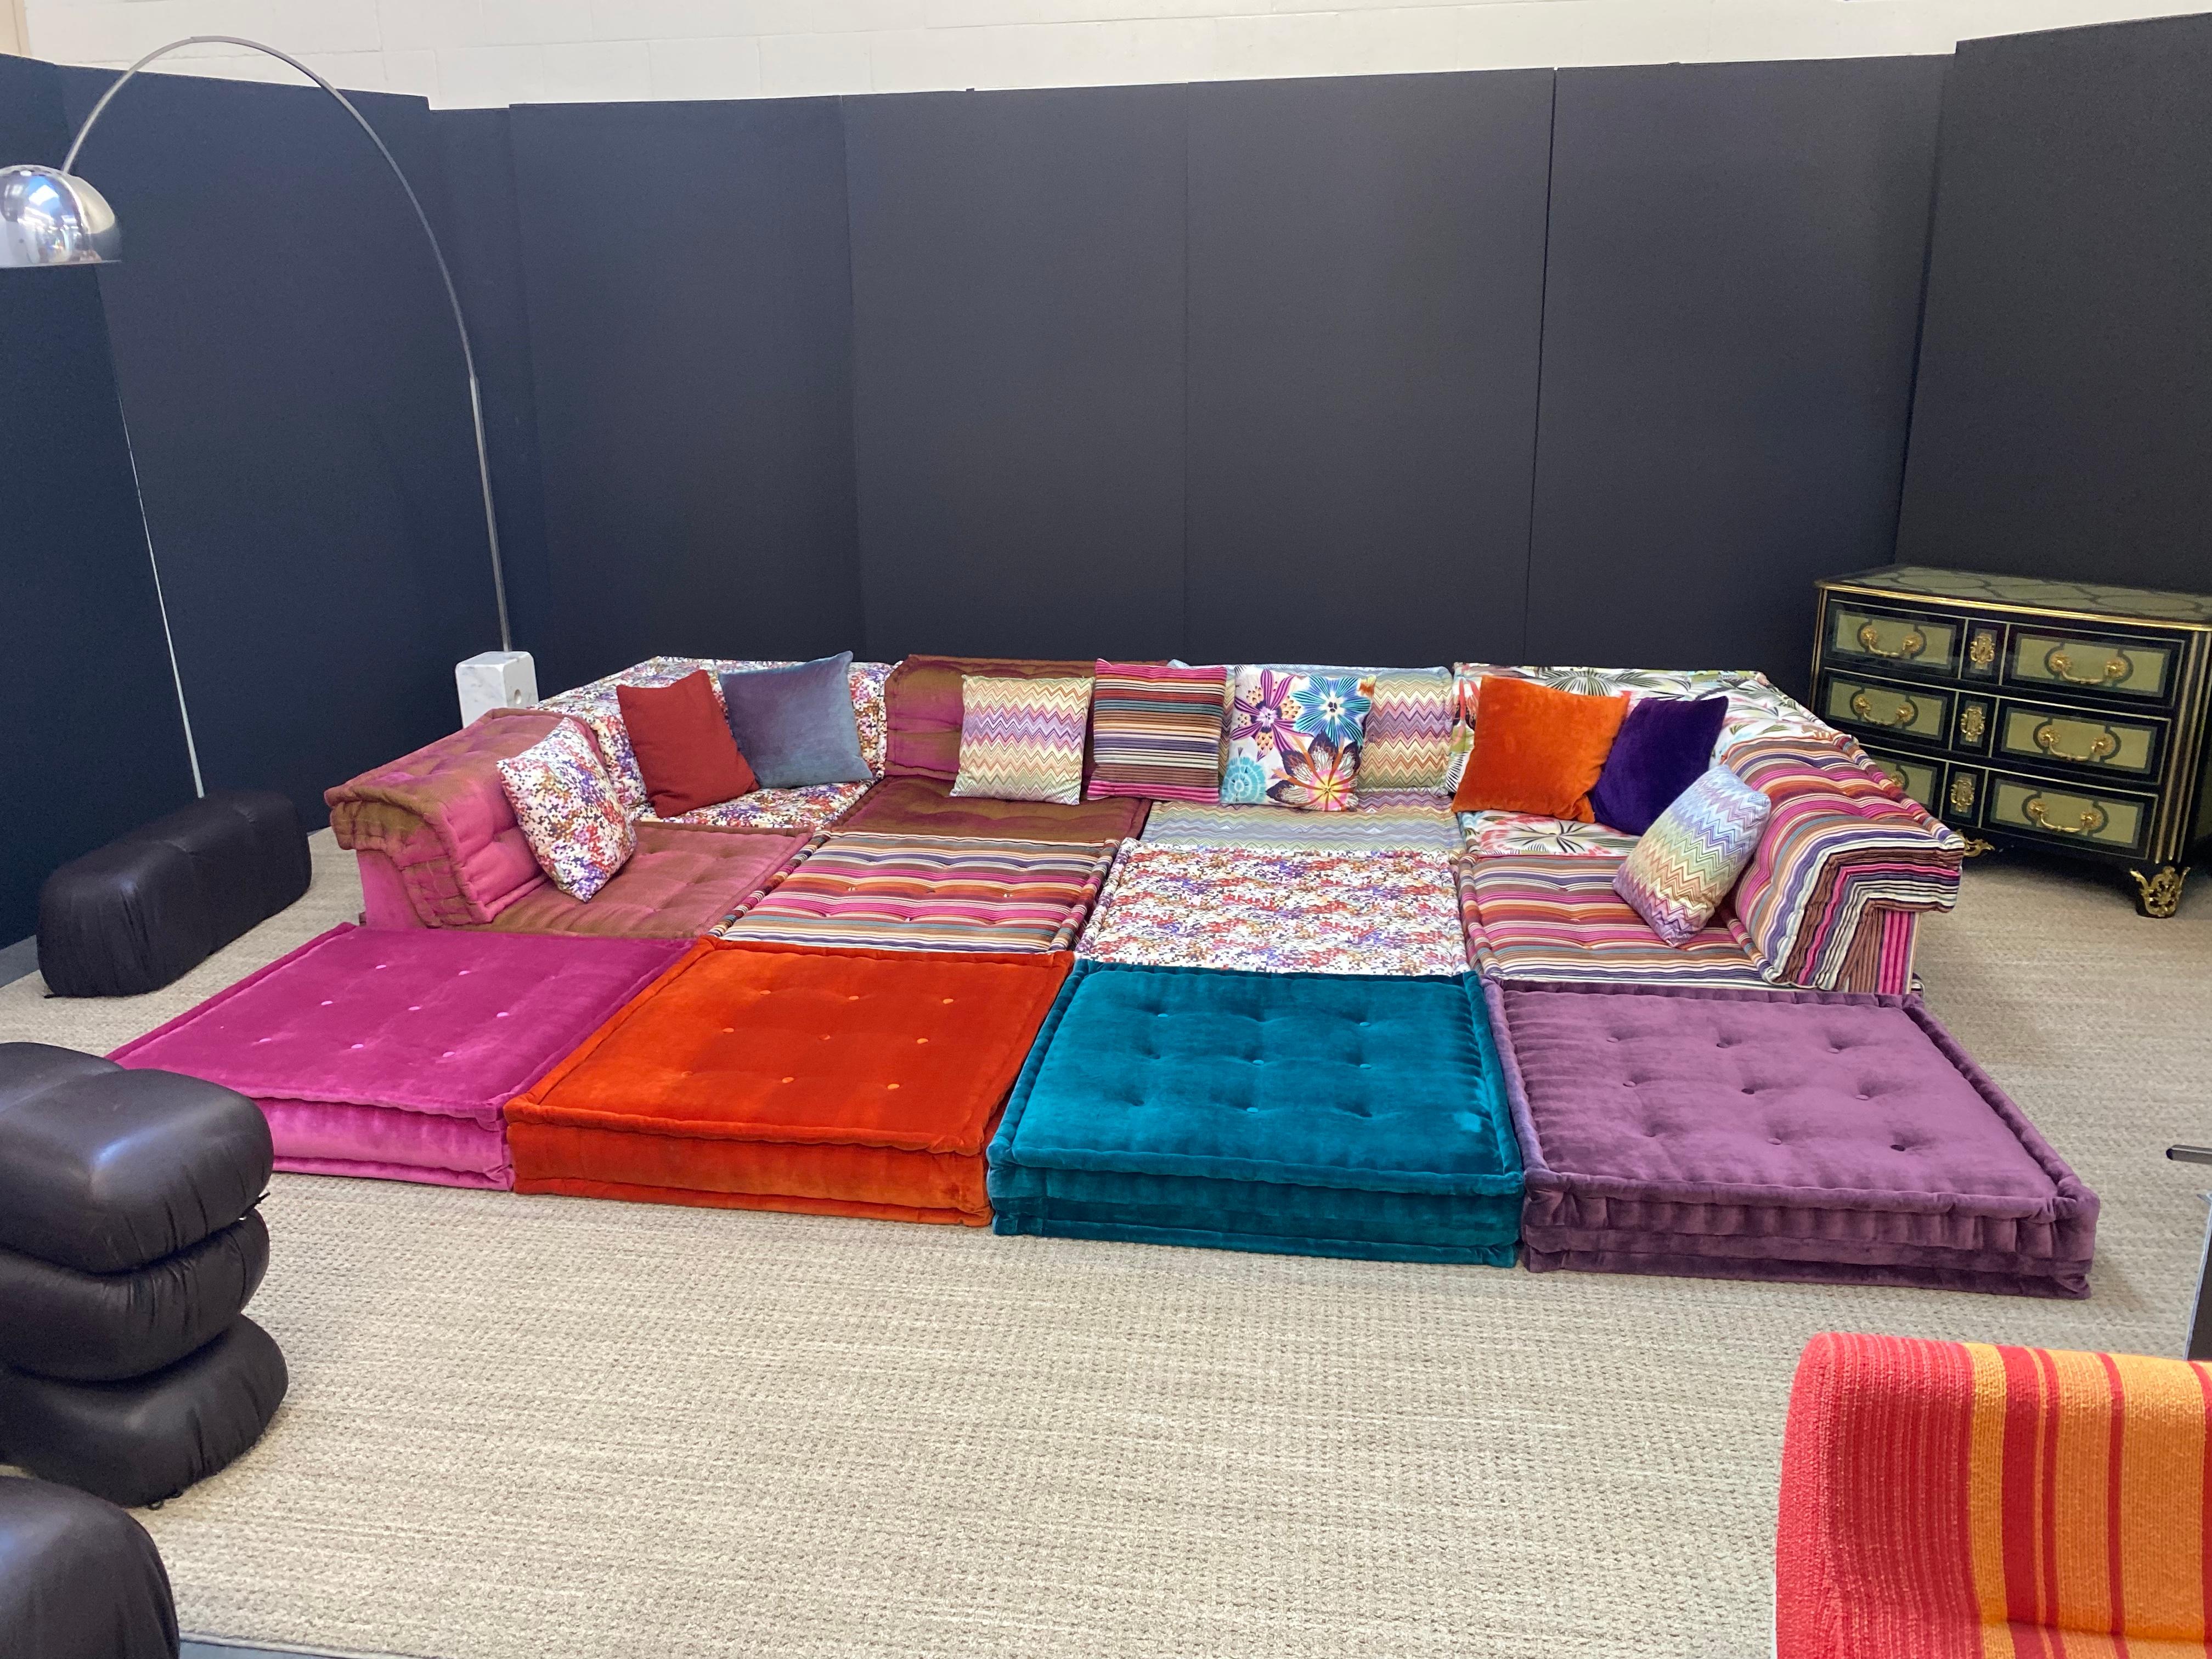 This incredibly large living room set designed by Hans Hopfer and edited by Missoni for Roche Bobois, is called the 